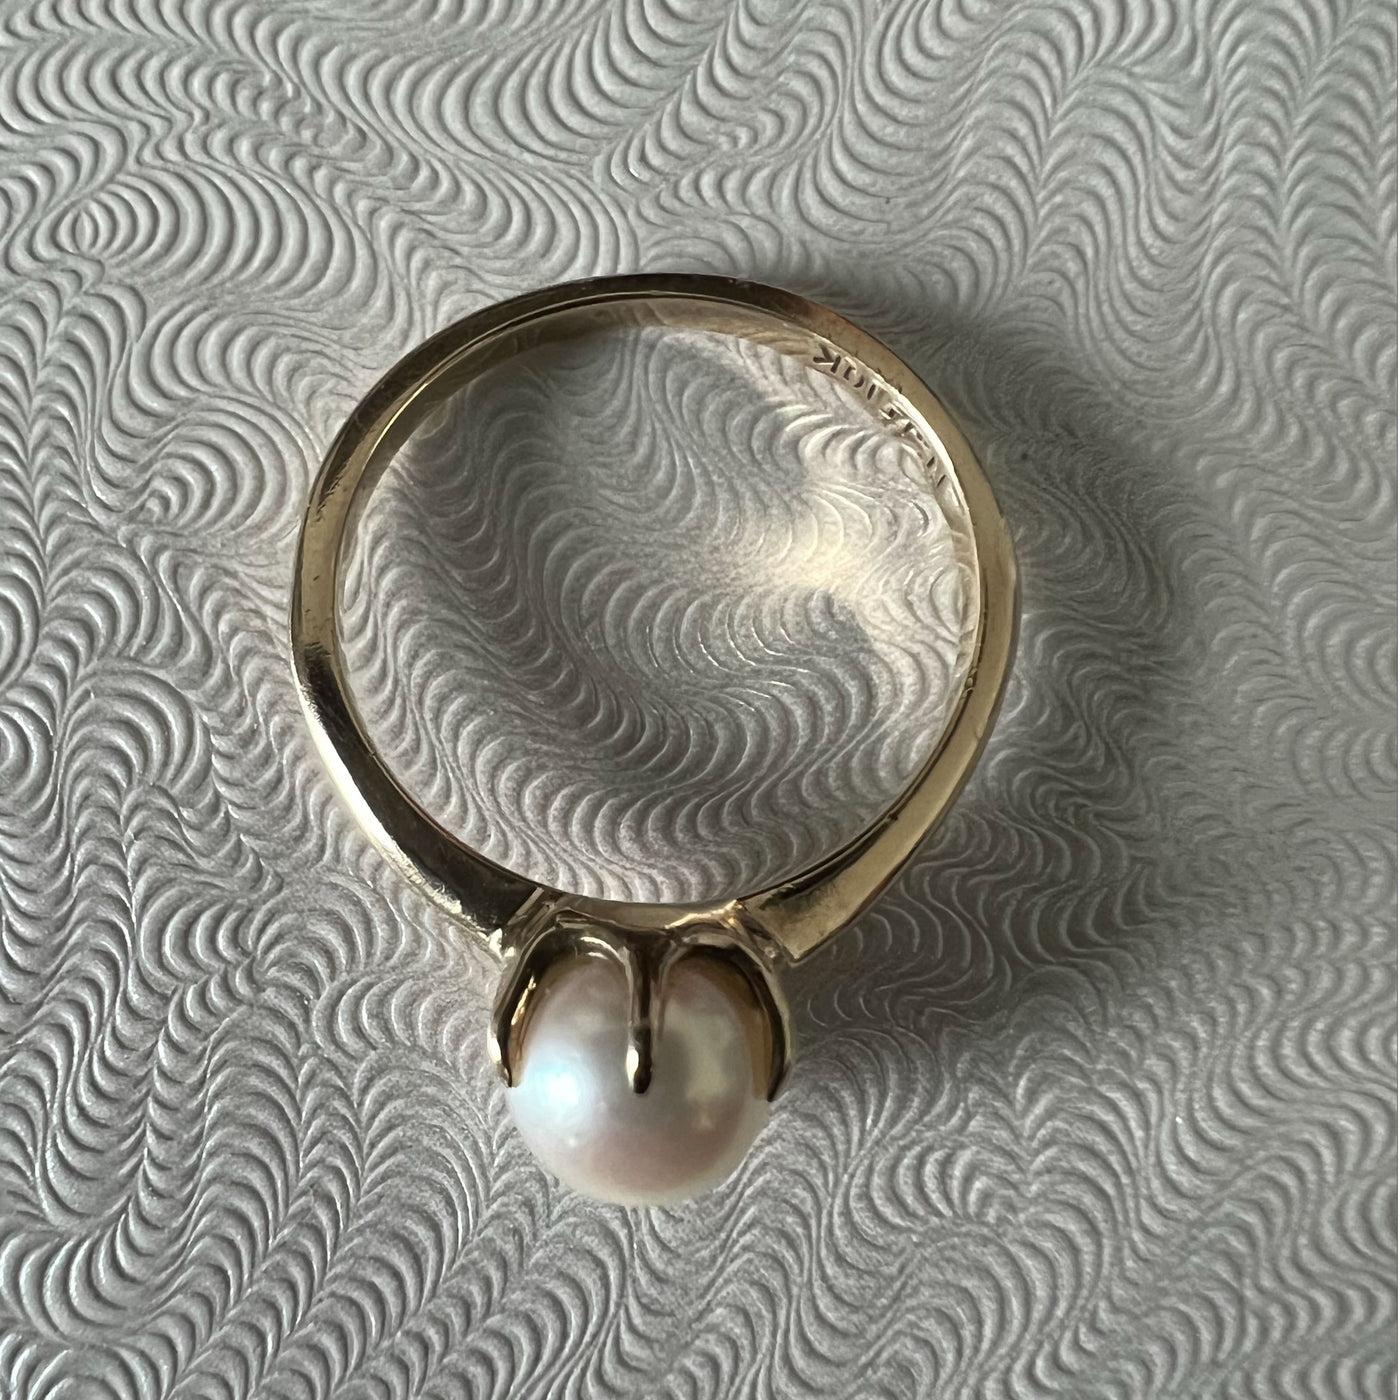 Vintage 10K Yellow Gold Cultured Pearl Solitaire Ring